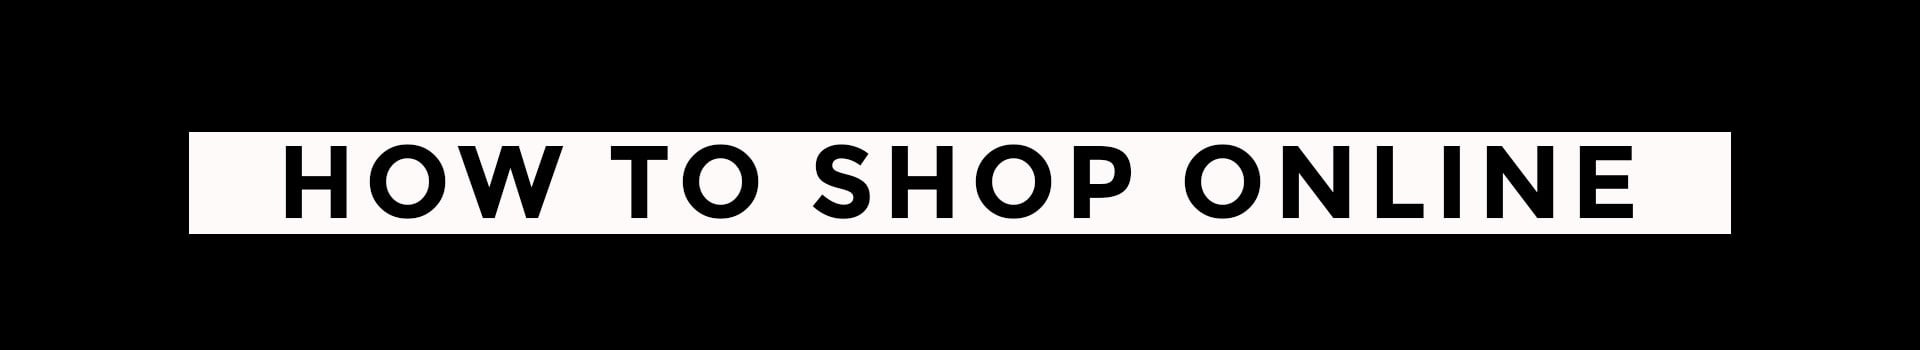 How to shop online guide | Studio 88